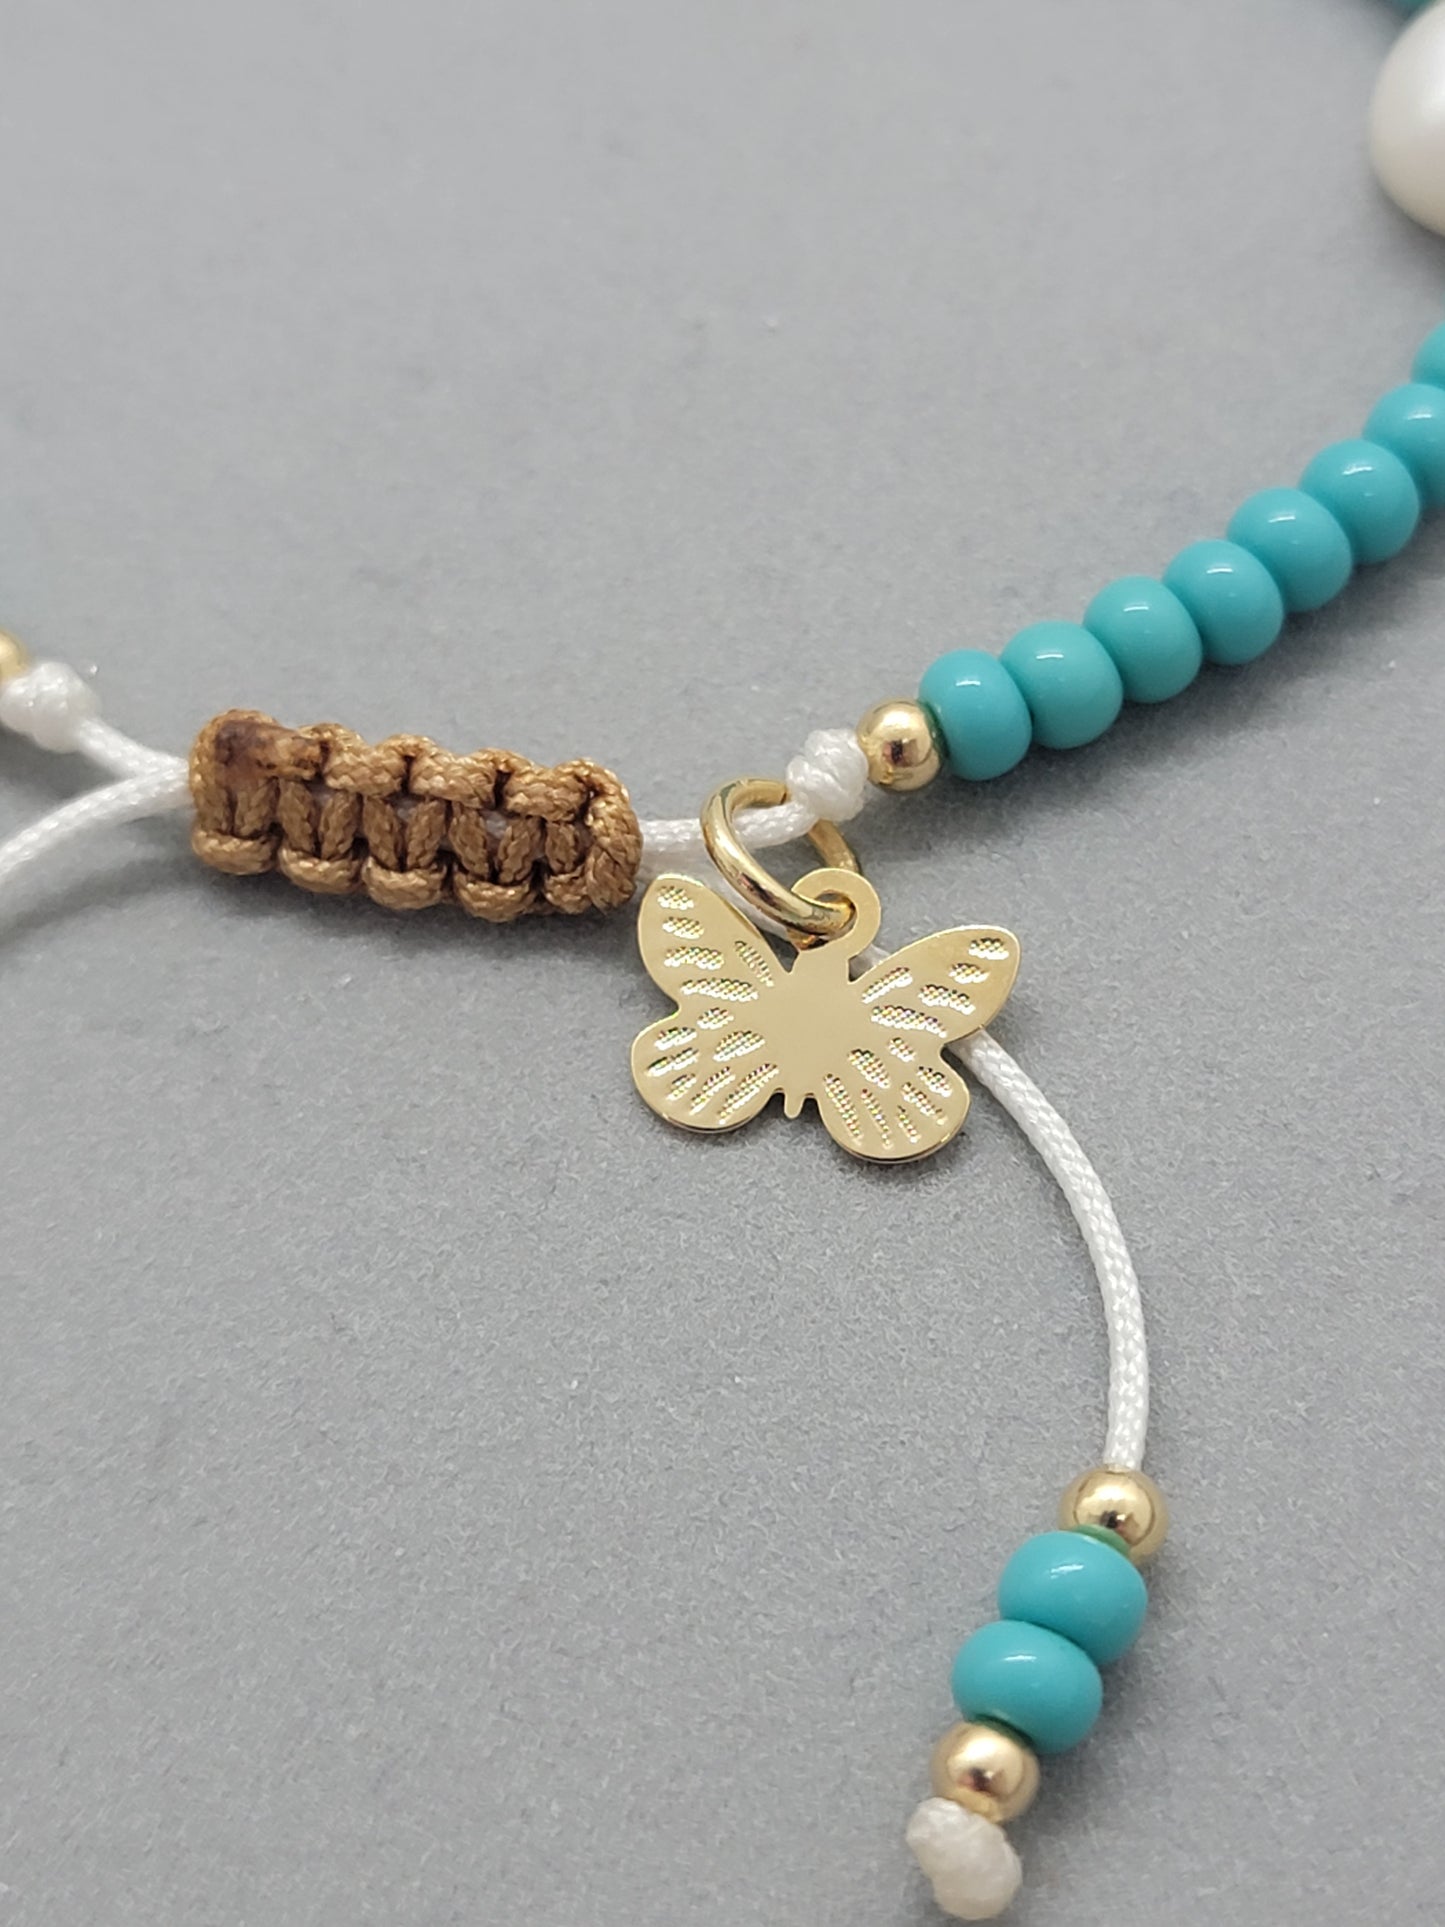 Handmade Beaded Bracelet with Freshwater Pearls and 18k Gold-Filled Butterfly Charm